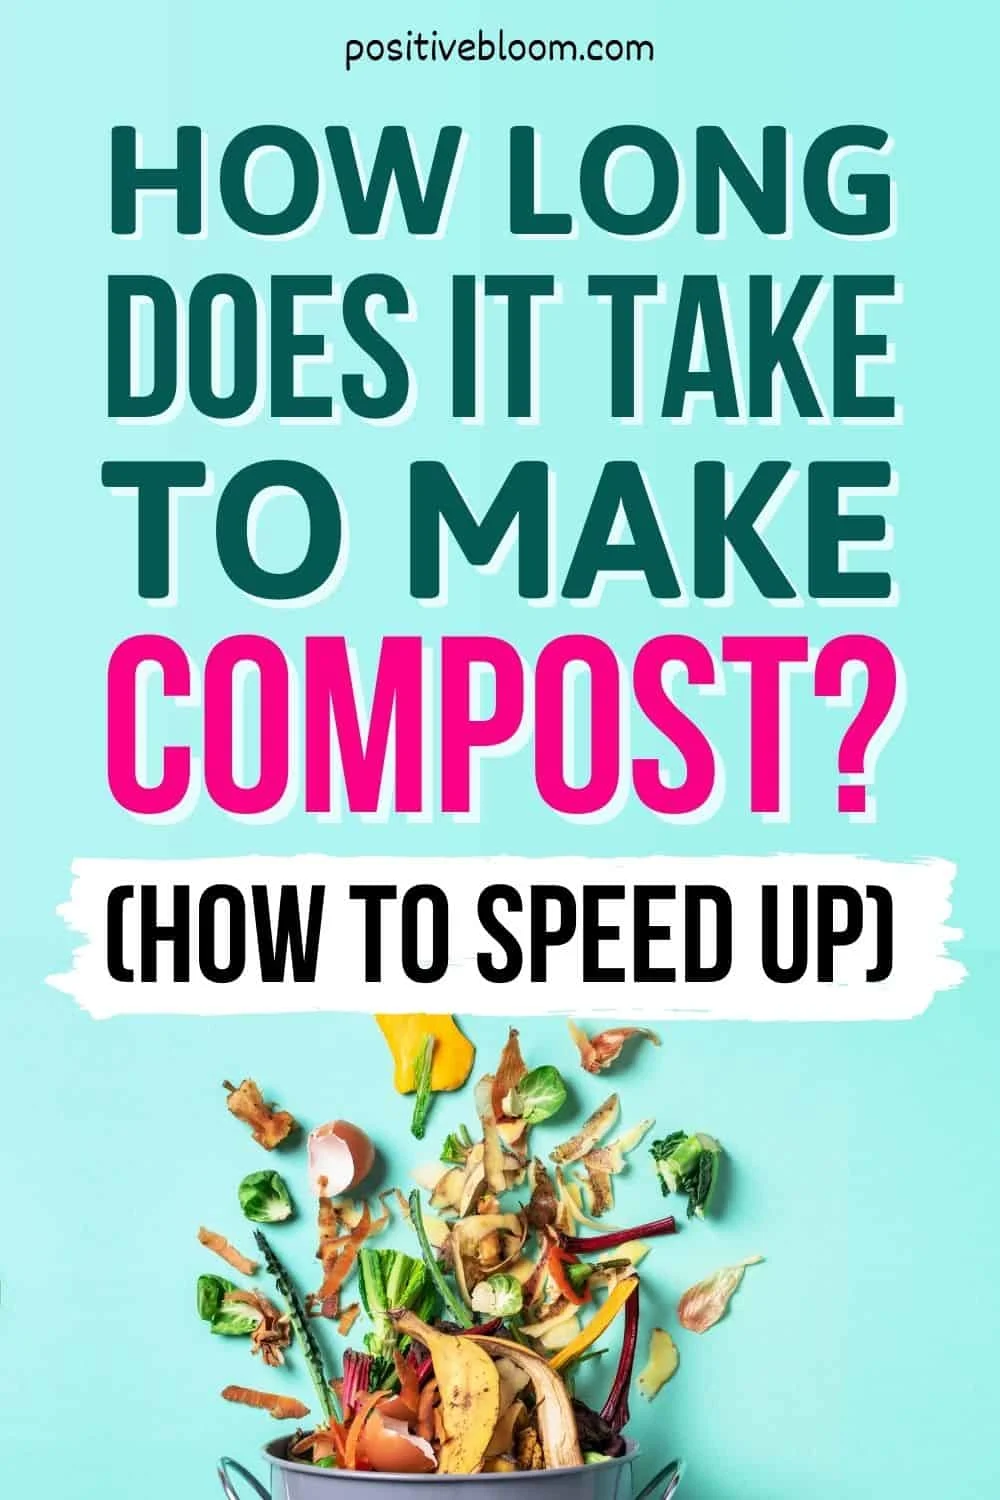 How Long Does It Take To Make Compost (How To Speed Up)